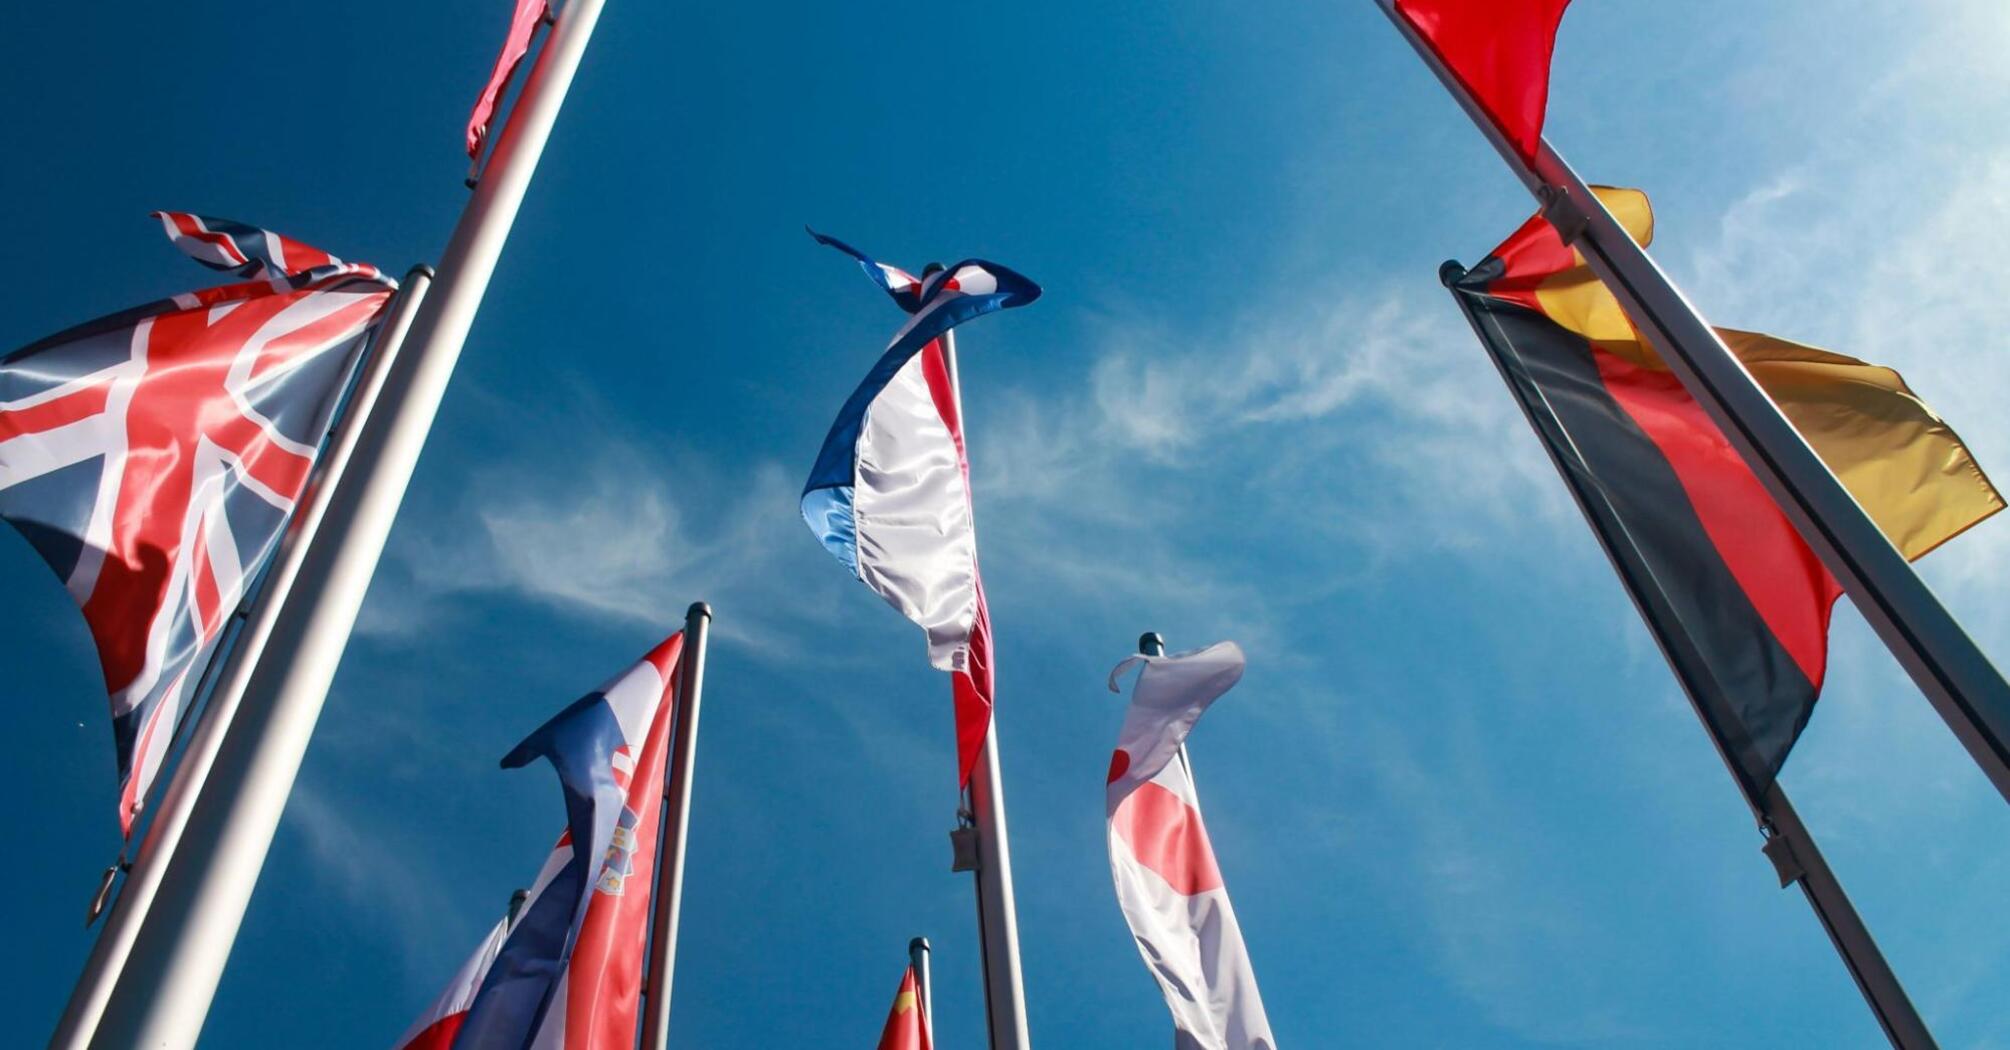 Flags of different countries against the background of a clear blue sky